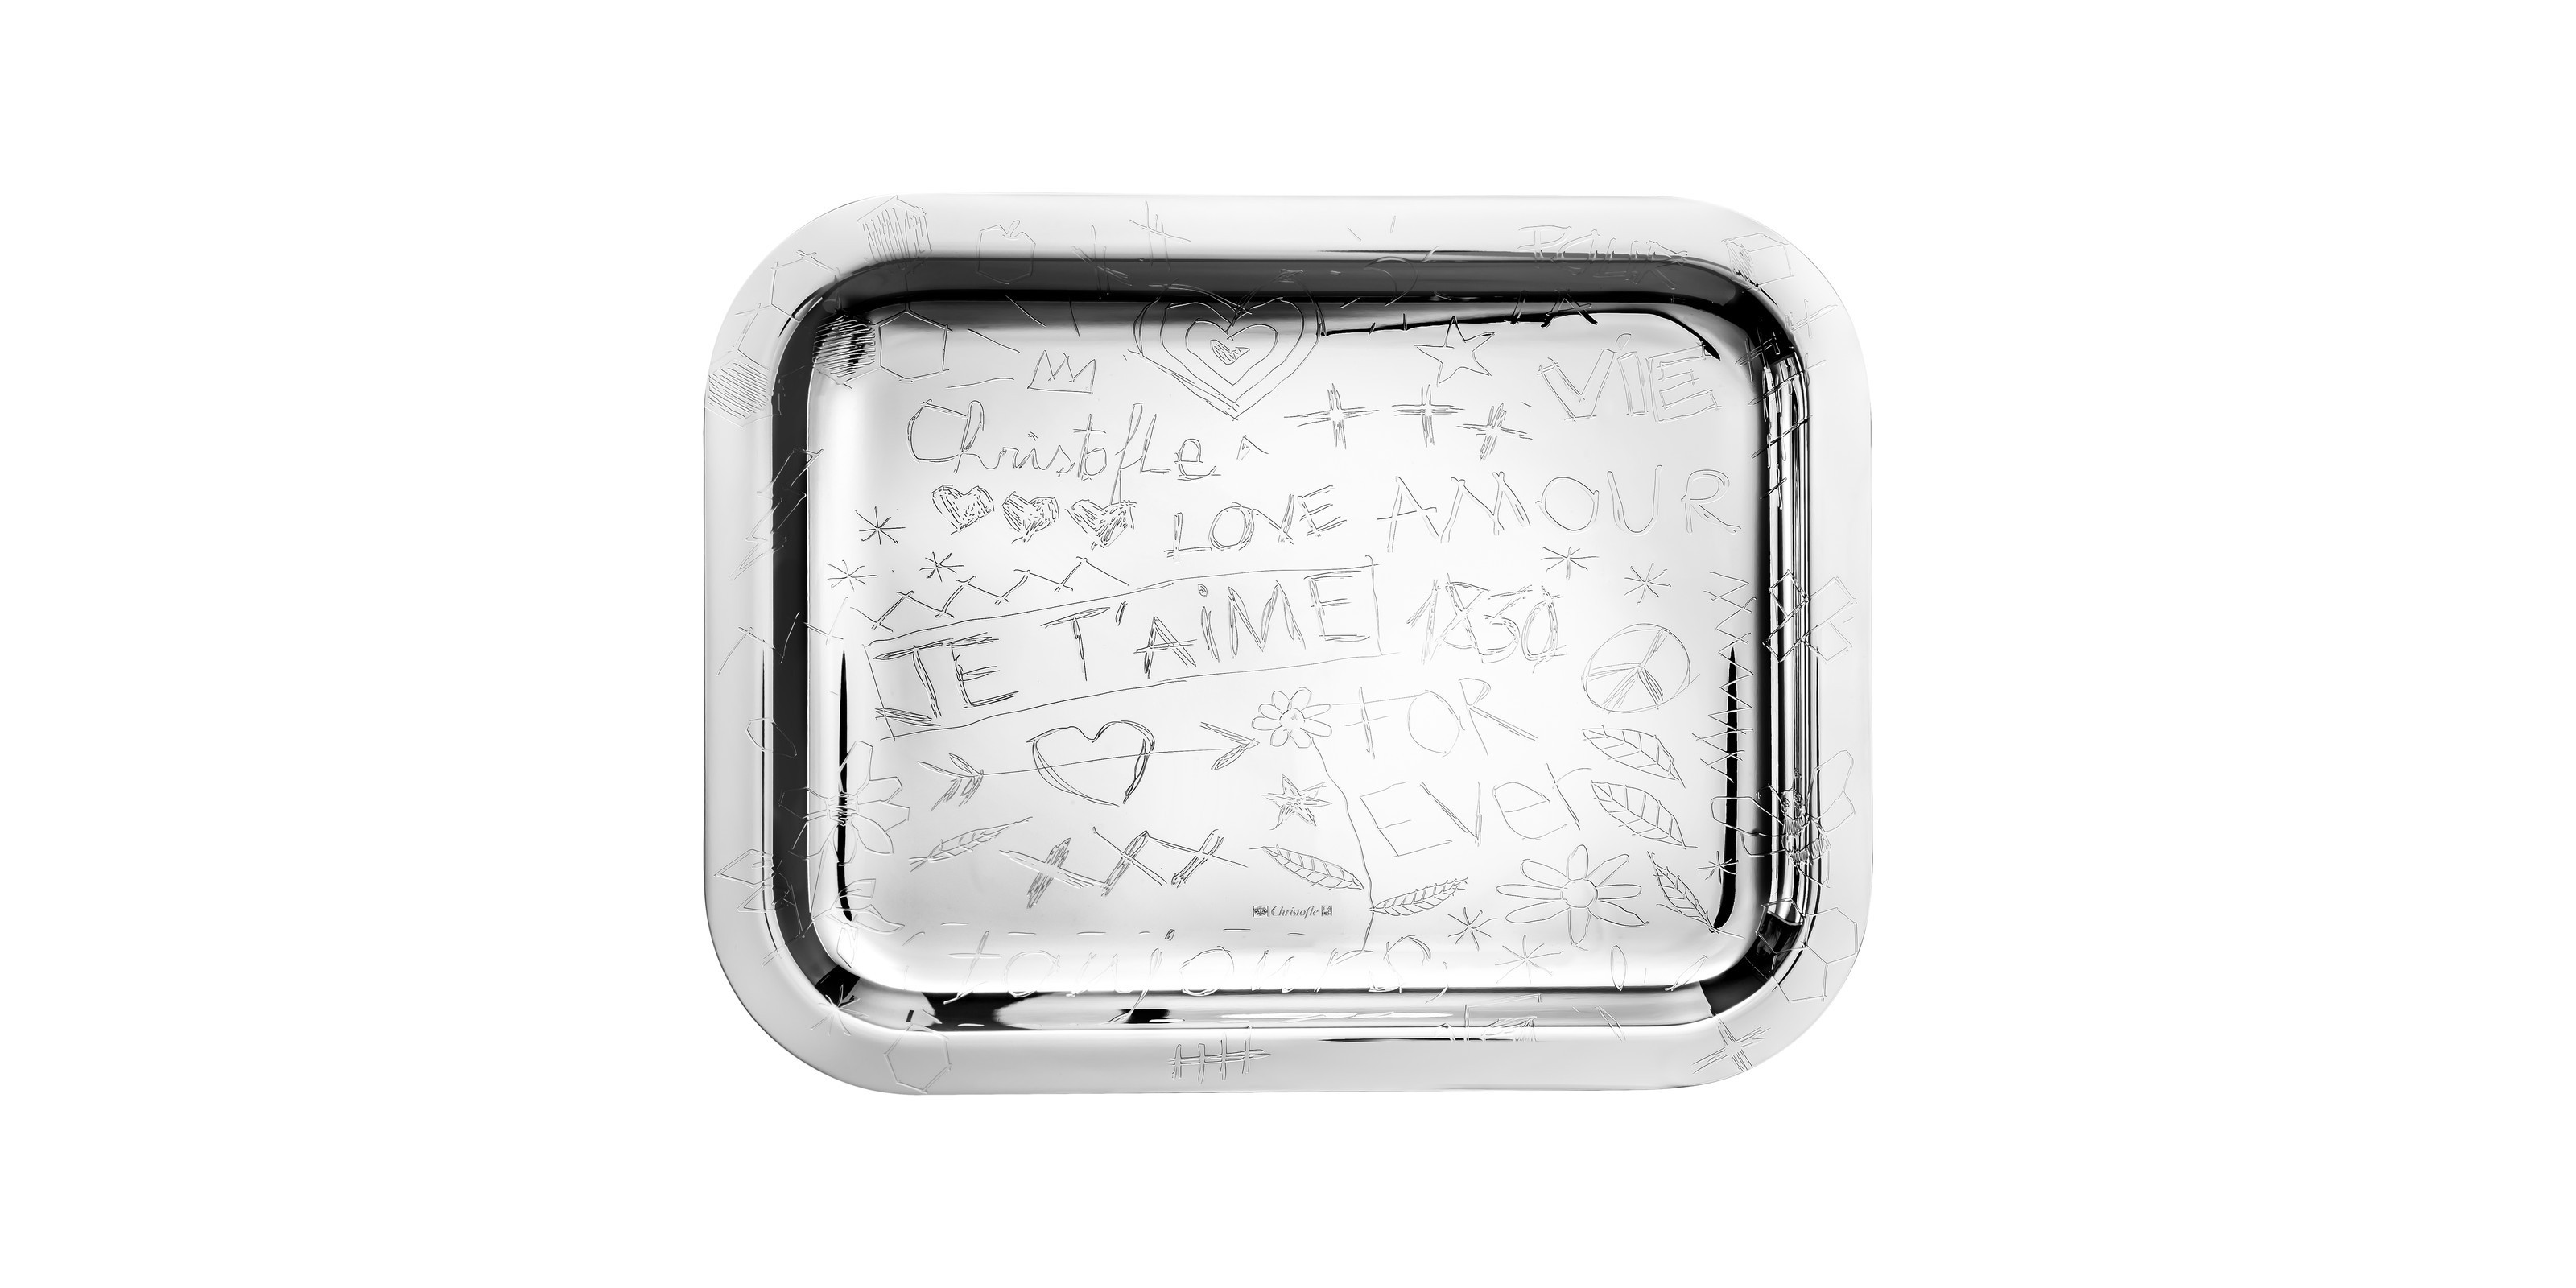 20 attractive Christofle Uni Vase 2024 free download christofle uni vase of graffiti silver plated serving tray with regard to diminuer le zoom